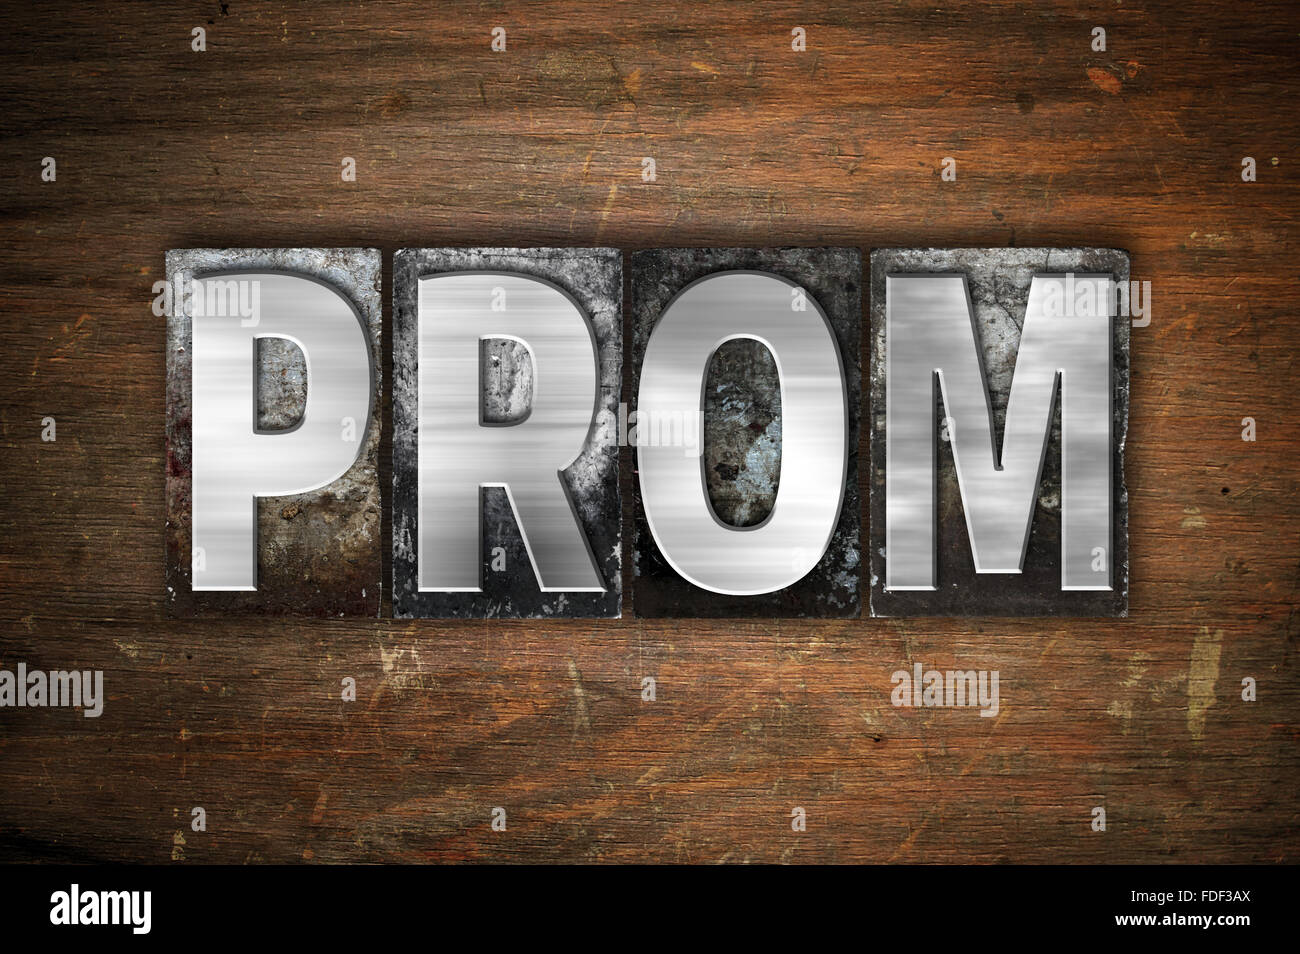 The word 'Prom' written in vintage metal letterpress type on an aged wooden background. Stock Photo